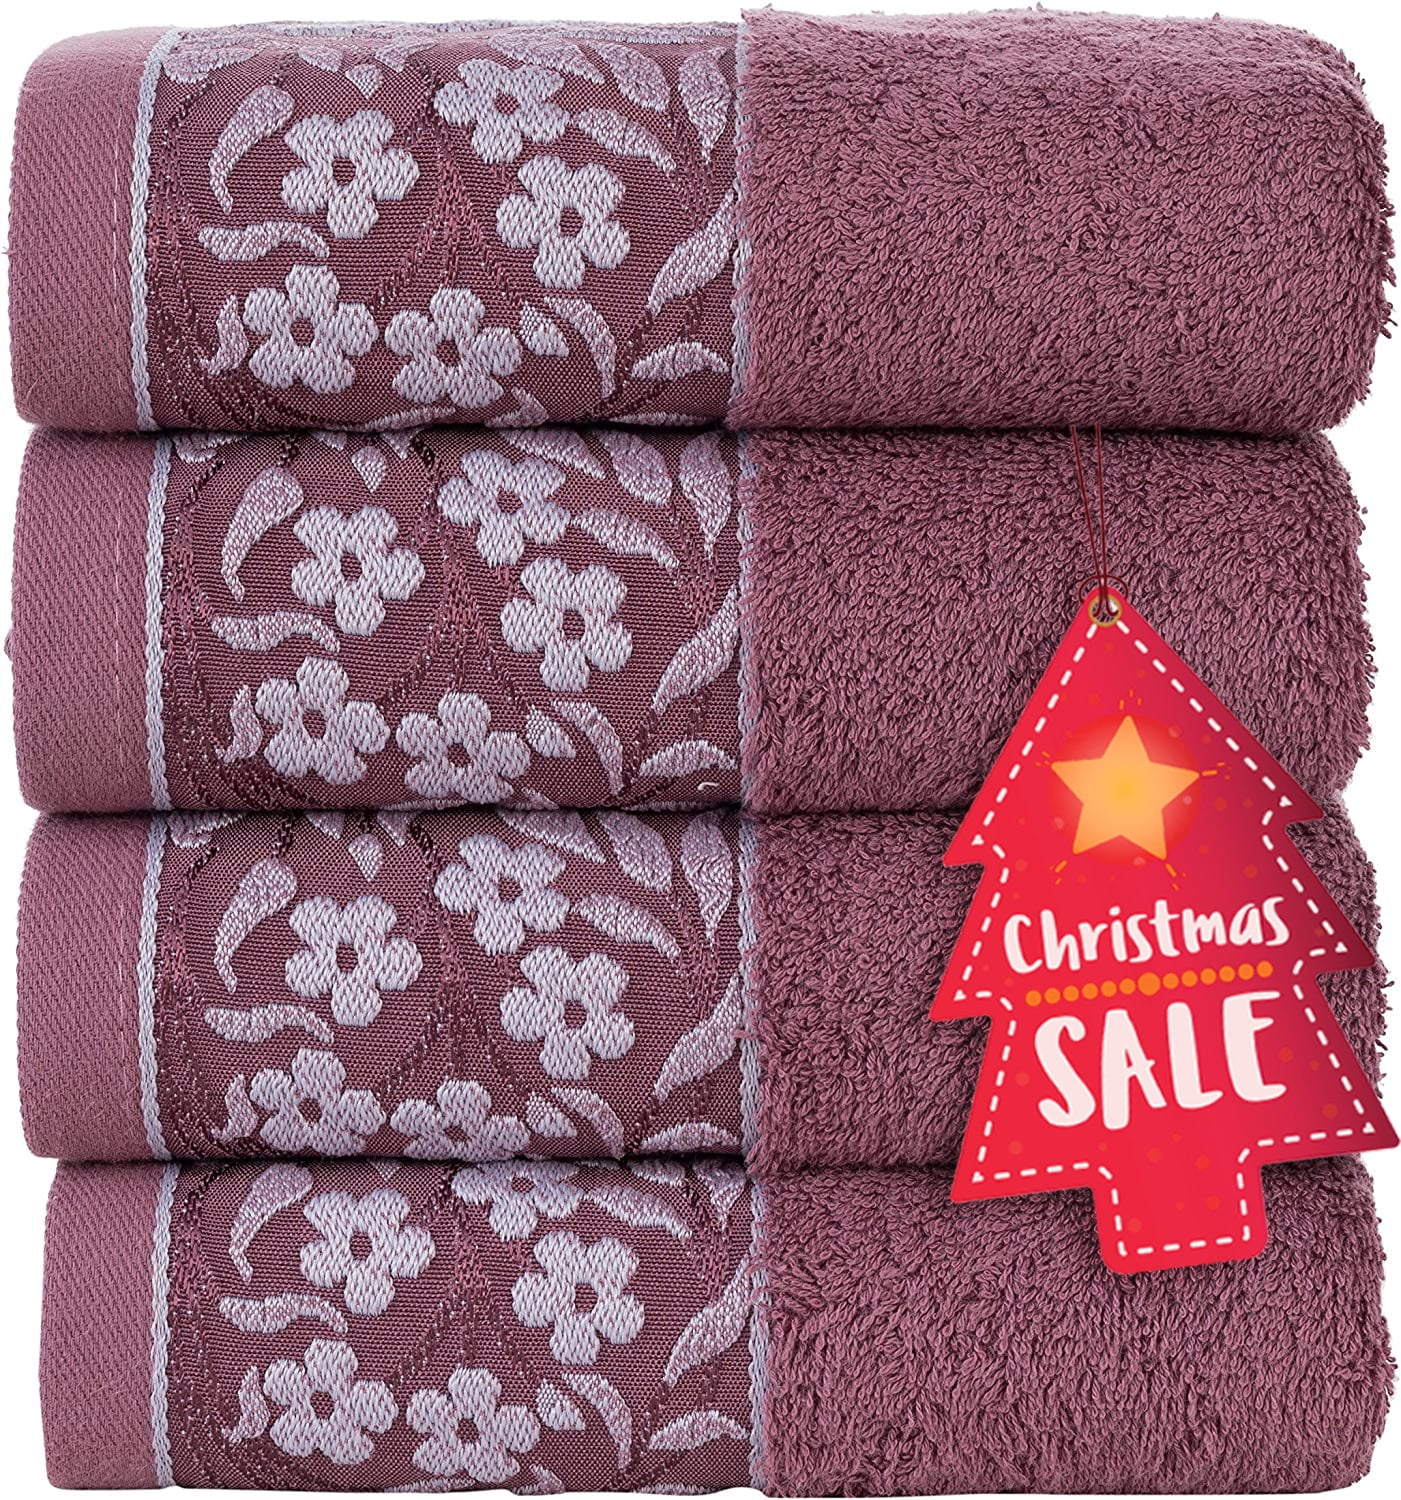 HALLEY Decorative Bath Towels Set, 6 Piece - Turkish Towel Set with Floral  Pattern, Highly Absorbent & Fade Resistant Fabric, 100% Cotton - White 